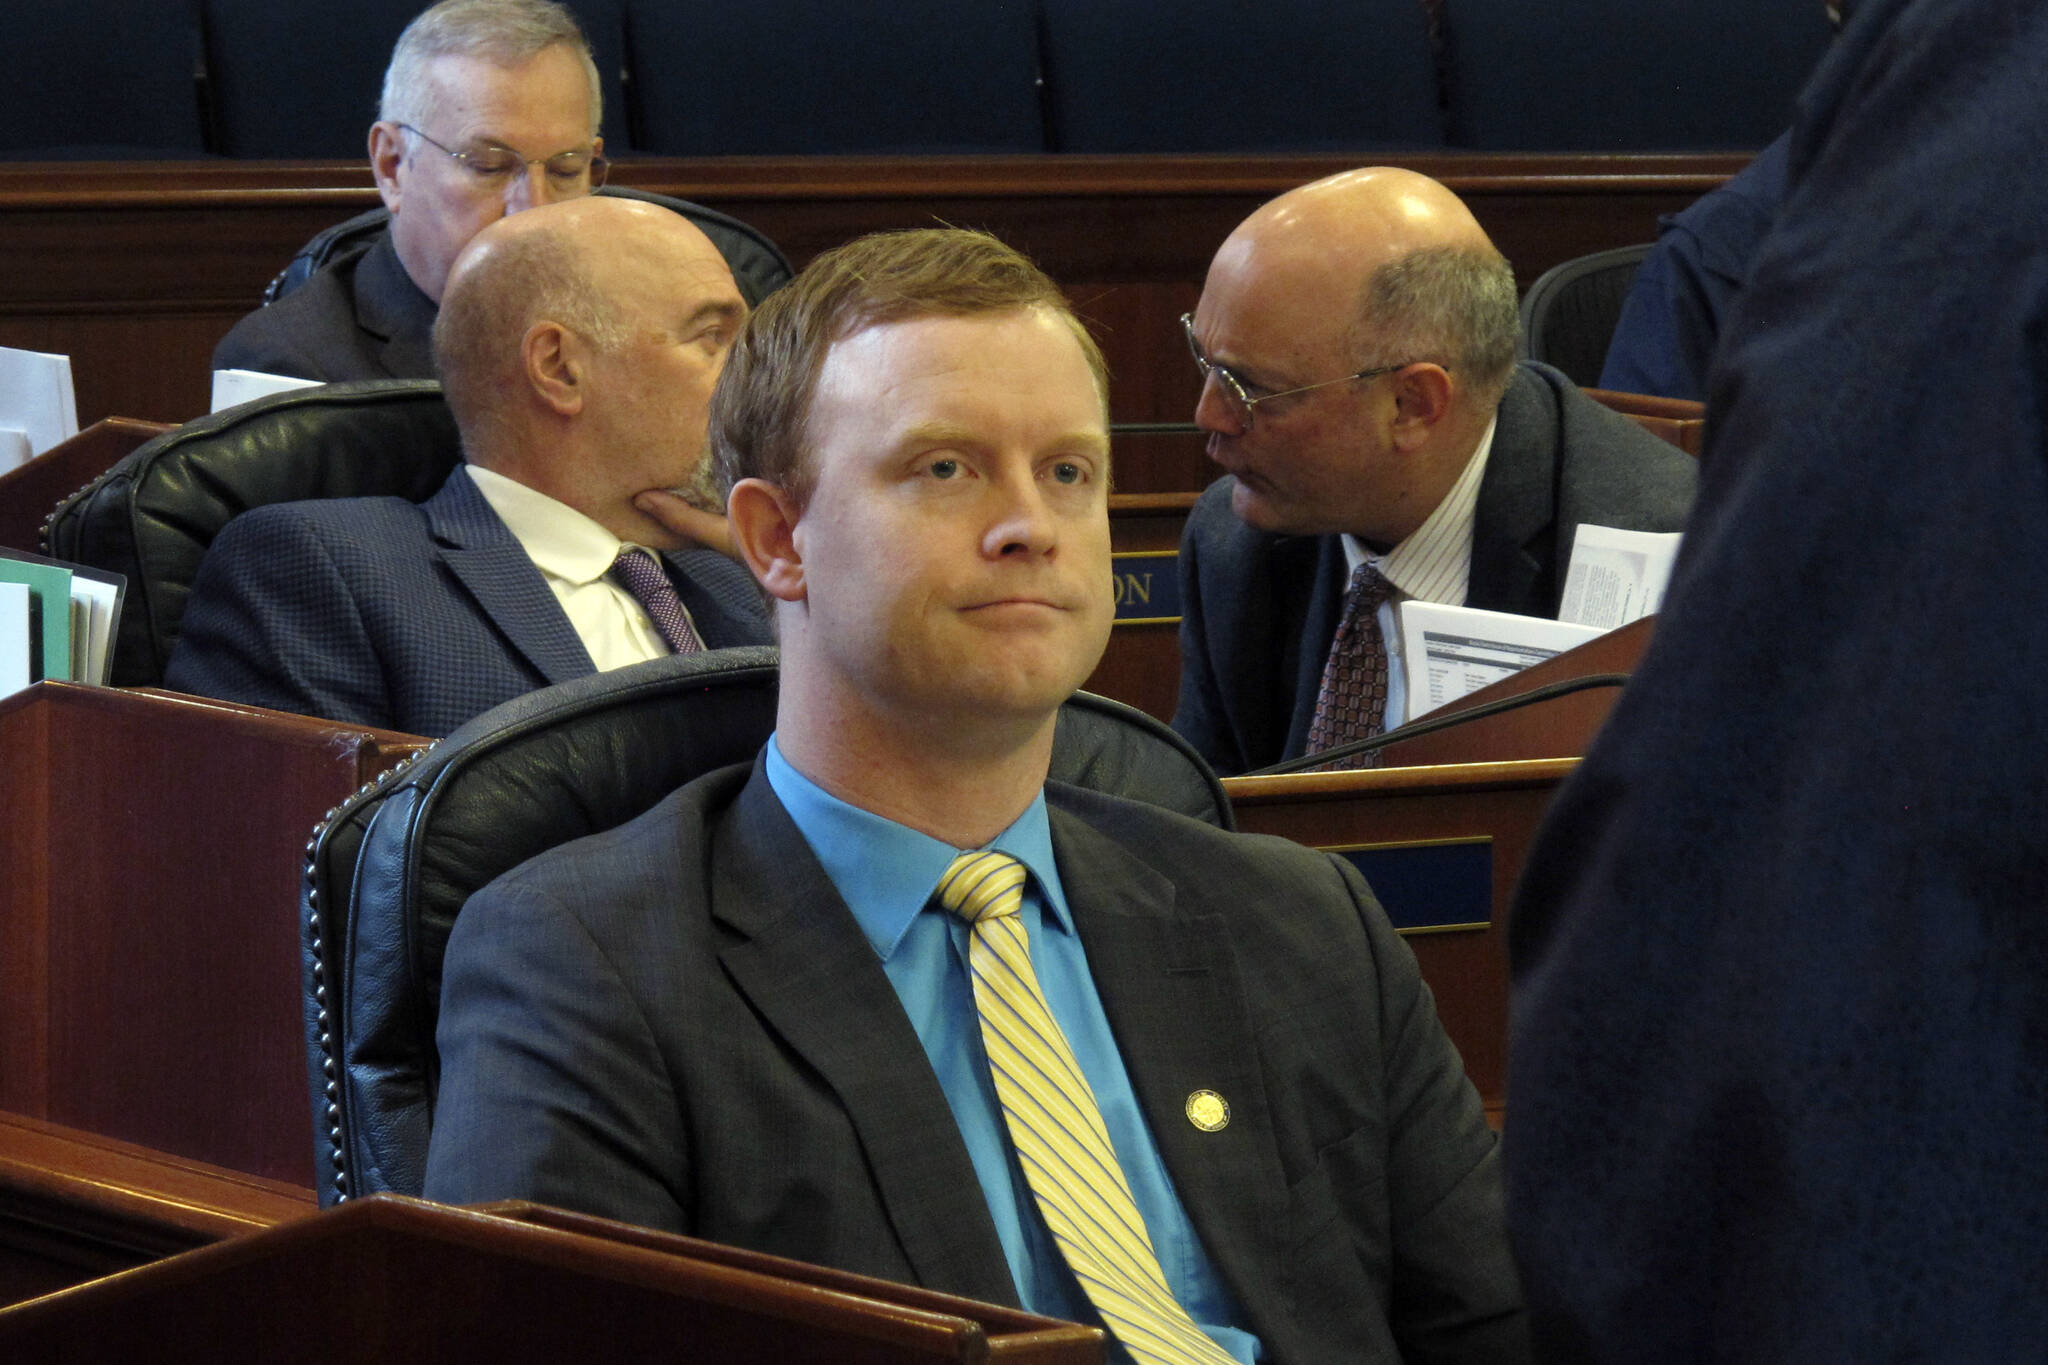 Alaska state Rep. David Eastman, R-Wasilla, sits in the House on April 29, 2022, in Juneau, Alaska. Eastman, accused of violating the state constitution’s disloyalty clause over his lifetime membership in Oath Keepers, has not condemned the organization in the wake of the Jan. 6, 2021, insurrection at the U.S Capitol. “No, I generally don’t condemn groups,” Eastman, a Wasilla Republican, said during his bench hearing on Thursday, Dec. 15, 2022, his second day on the witness stand. (AP Photo / Becky Bohrer, File)